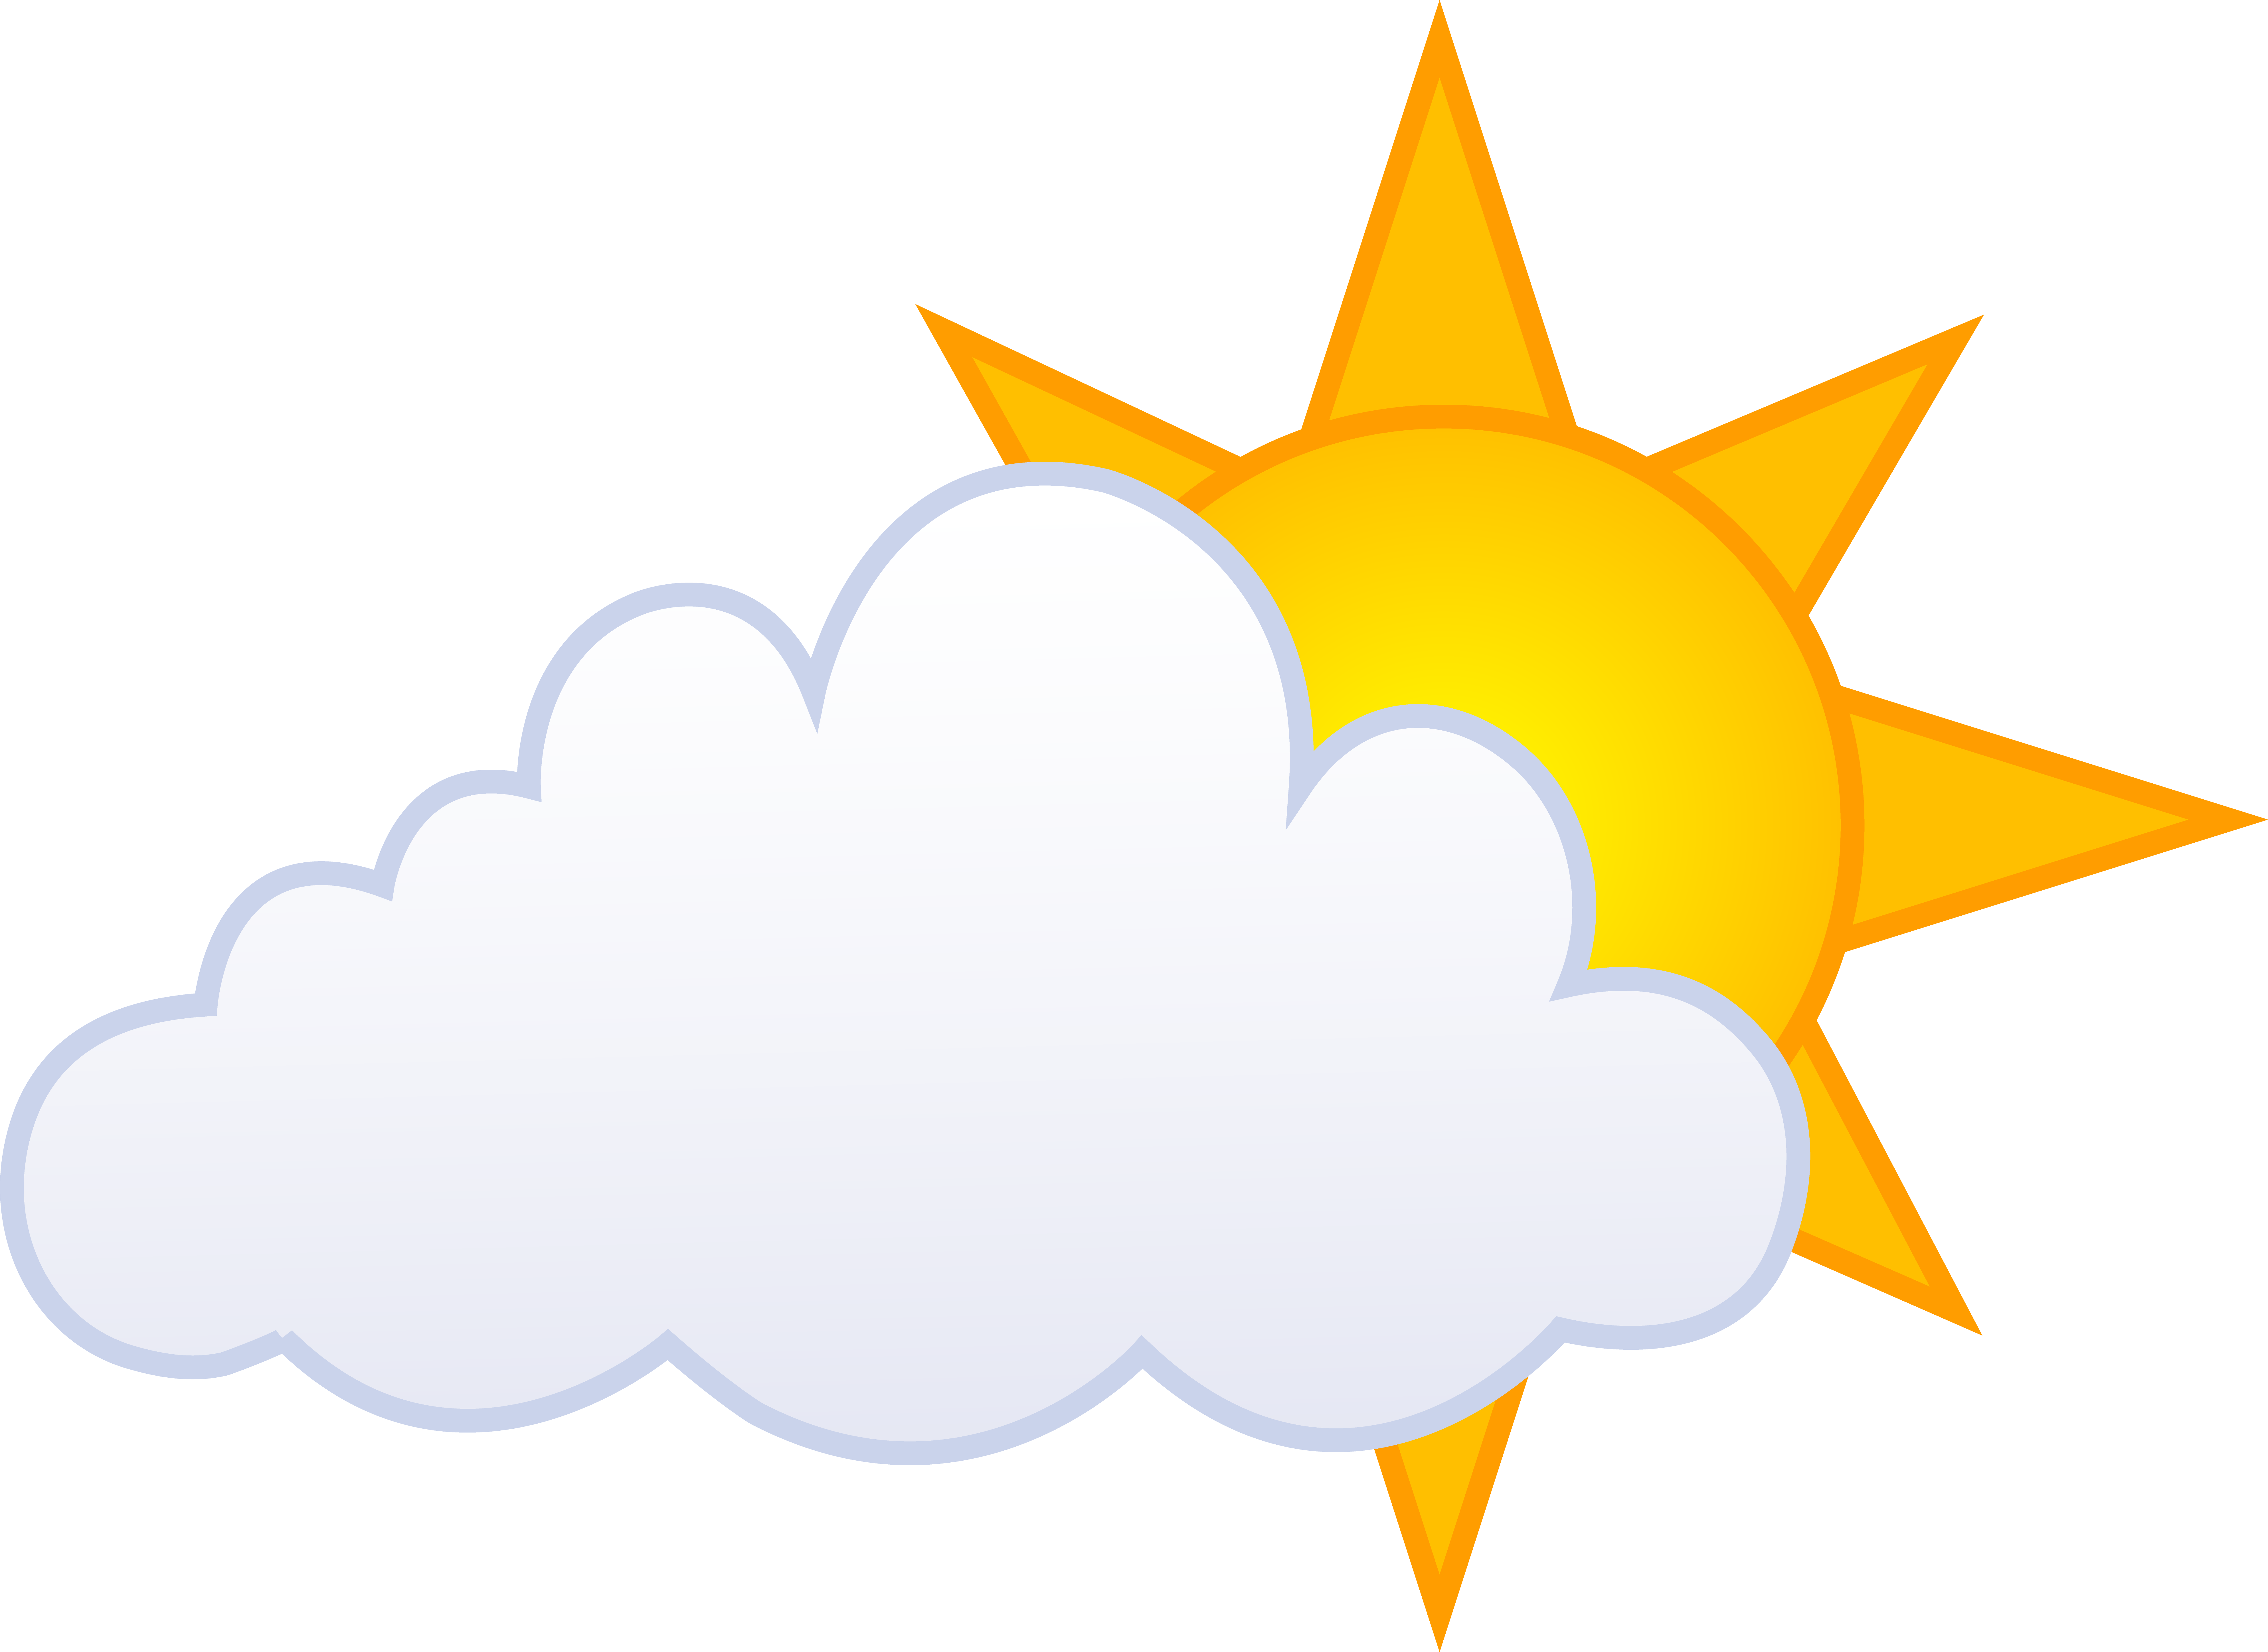 Partly cloudy weather clip art clipart clipart